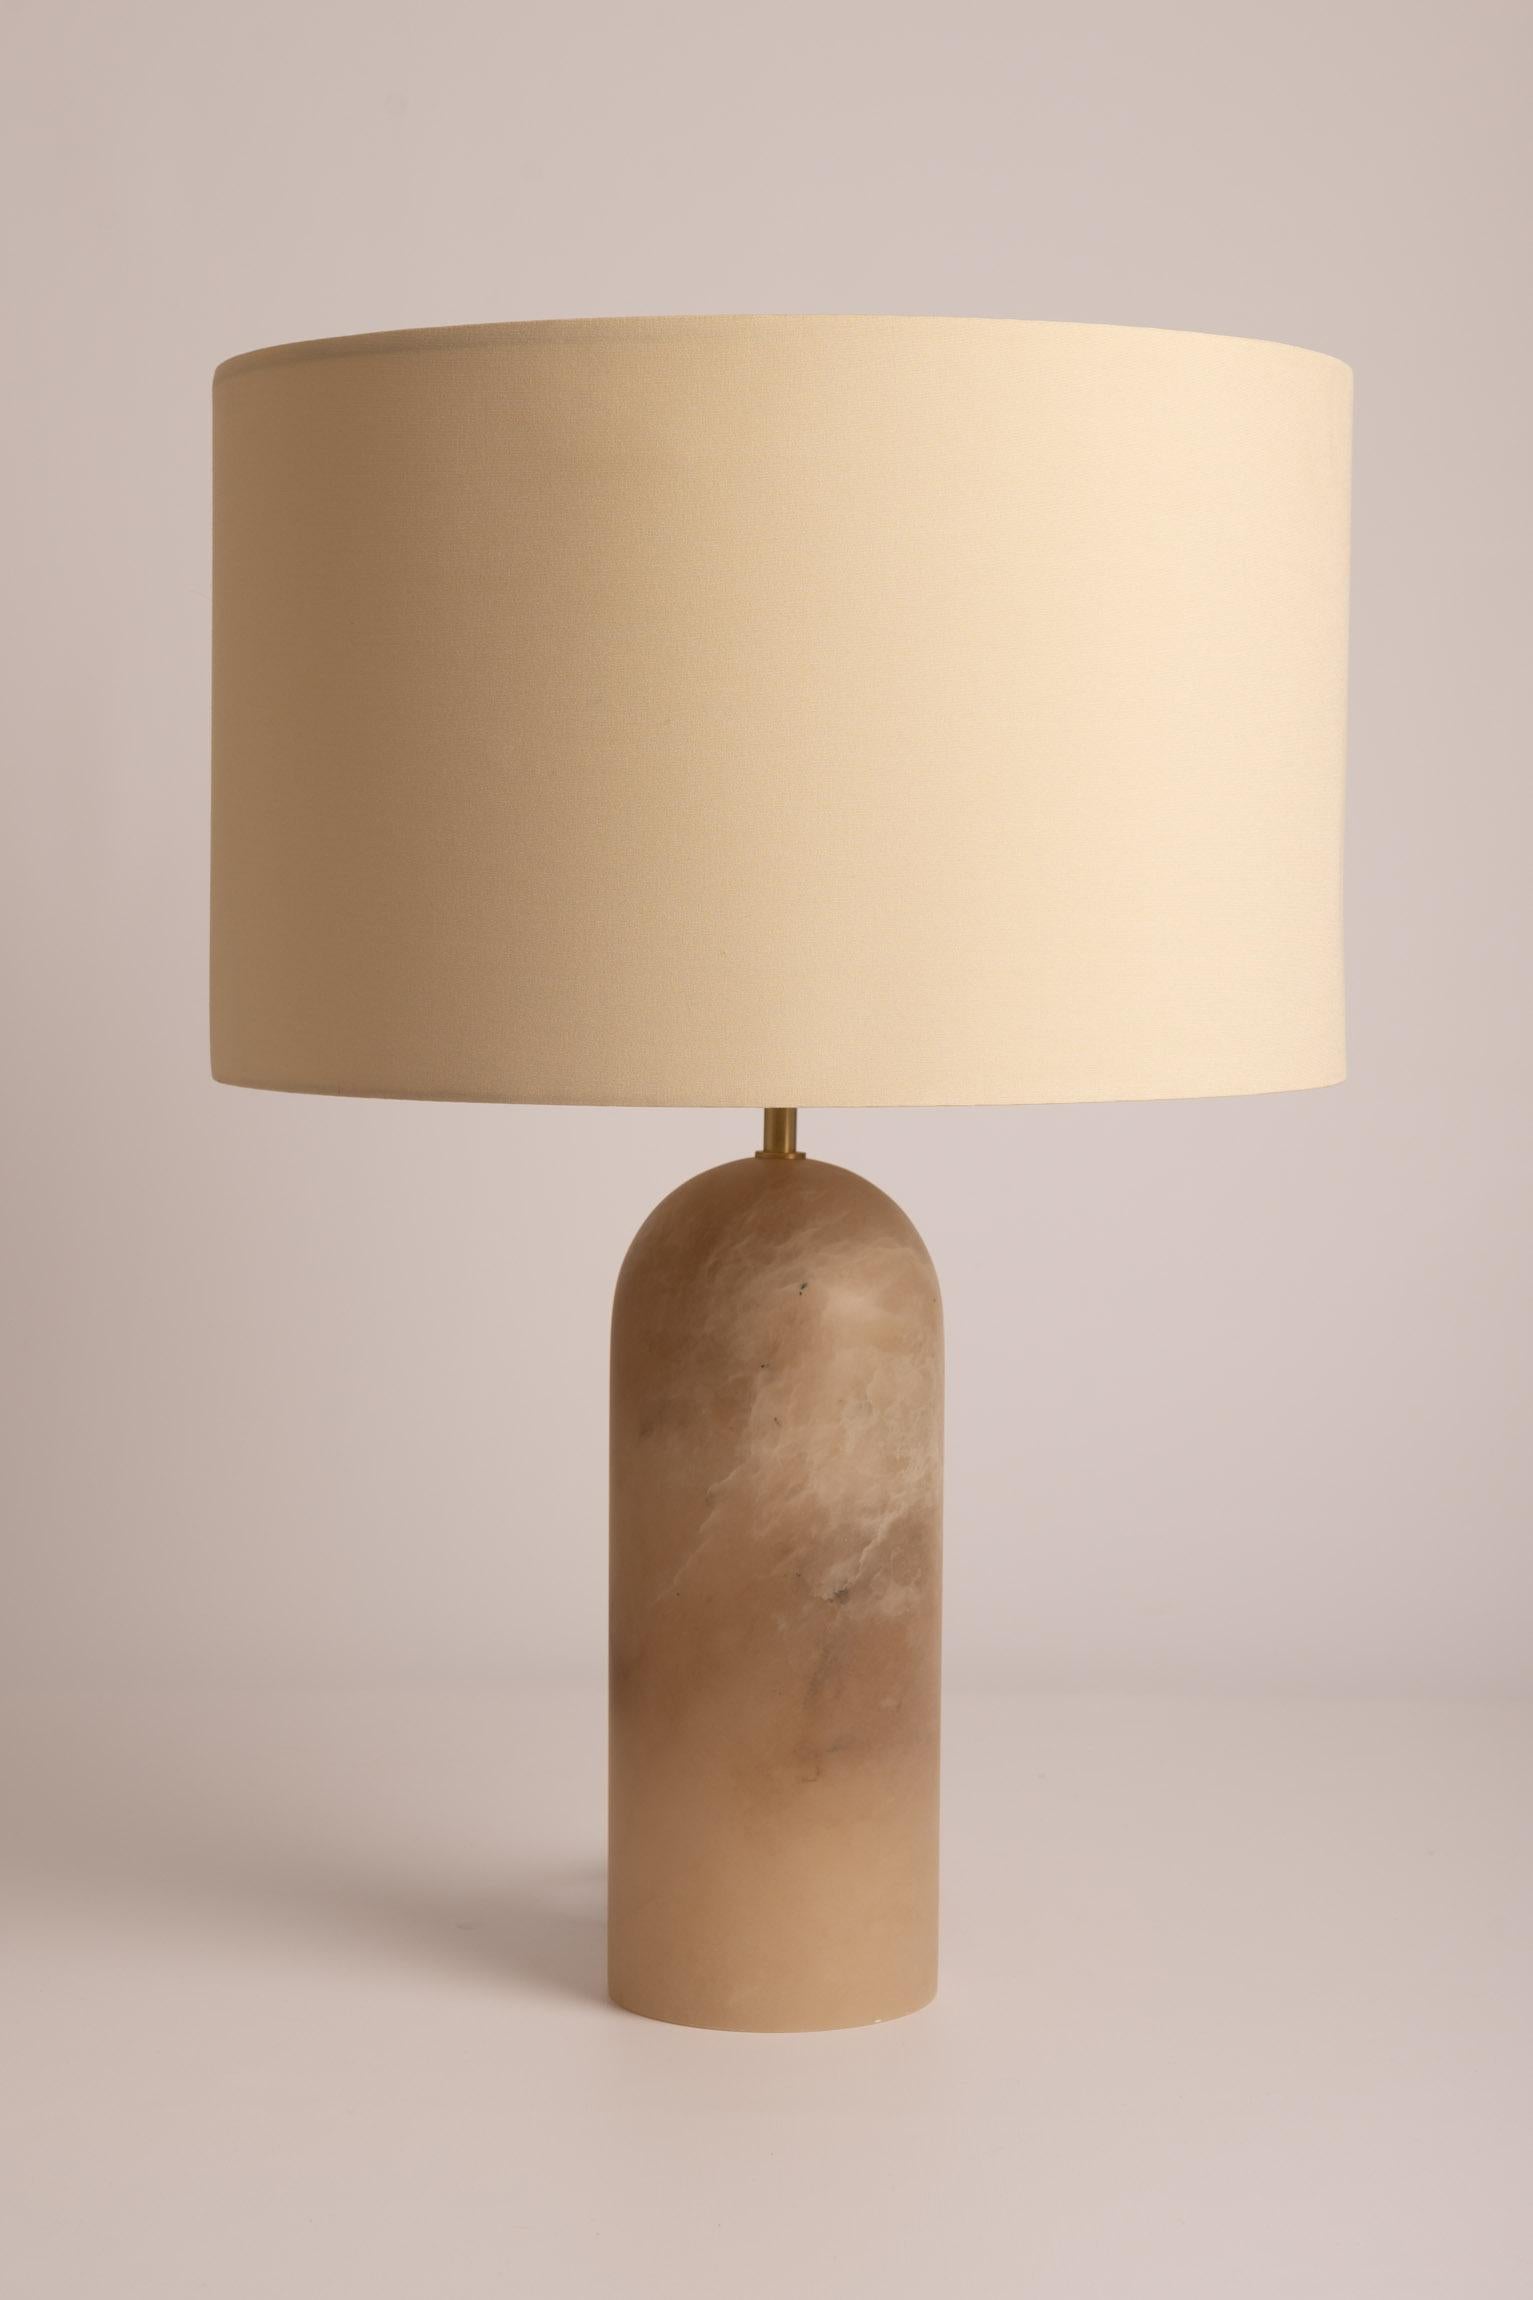 Tobacco Alabaster Pura Table Lamp by Simone & Marcel
Dimensions: Ø 40 x H 58 cm.
Materials: Brass, cotton and tobacco alabaster.

Also available in different marble, wood and alabaster options and finishes. Custom options available on request.